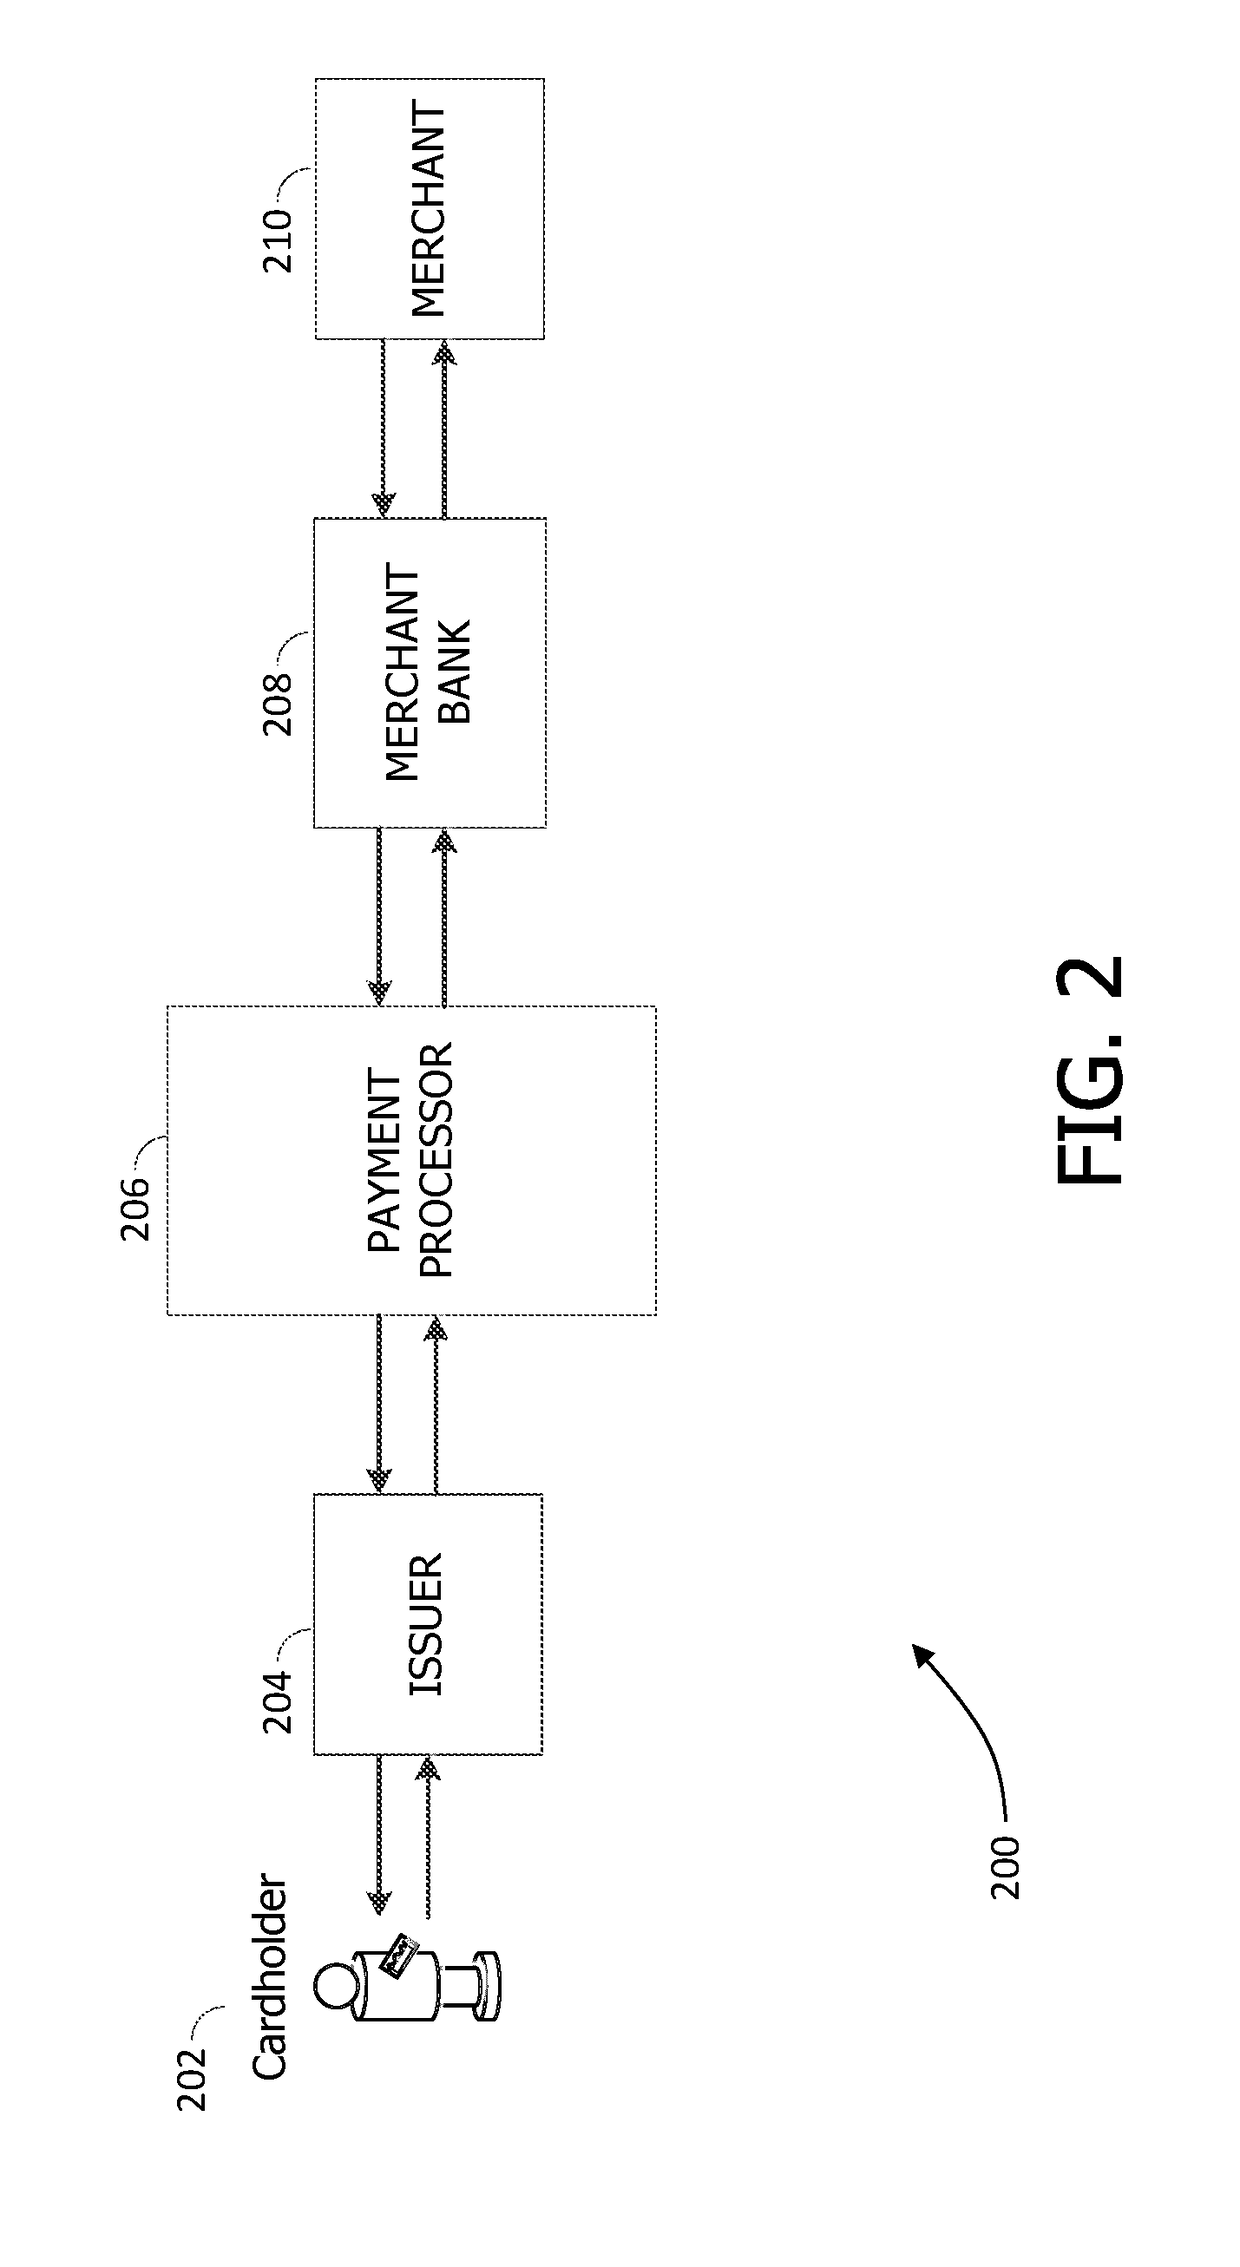 Communication network and method for processing pre-chargeback disputes